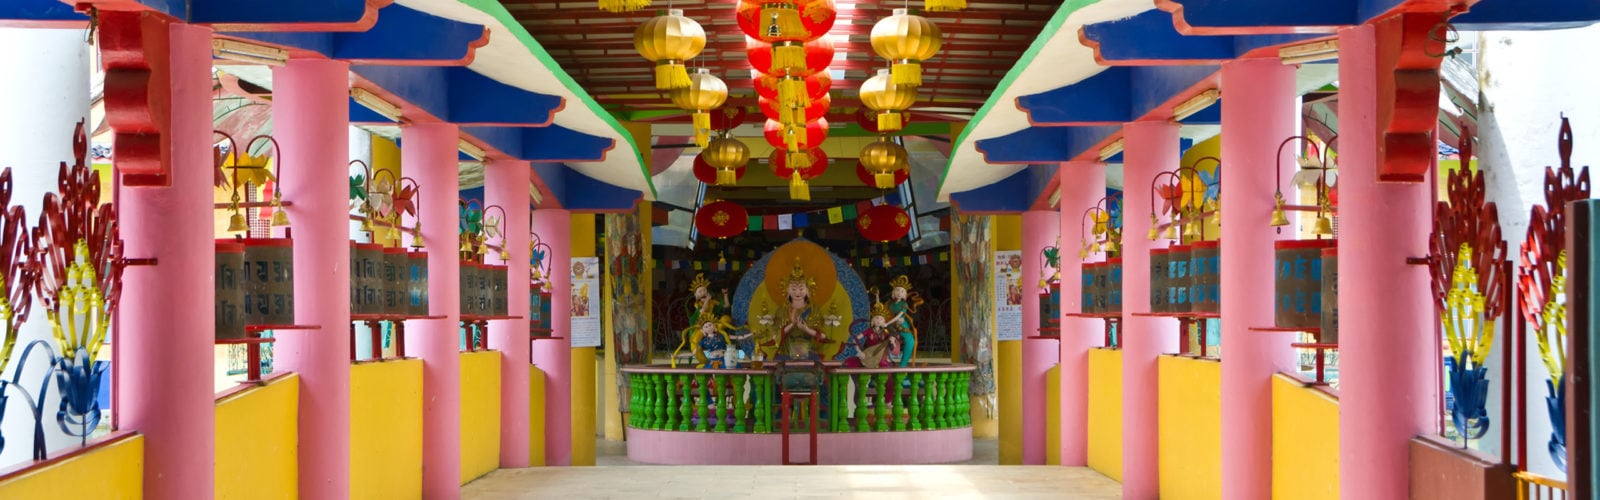 Cave temple Ipoh